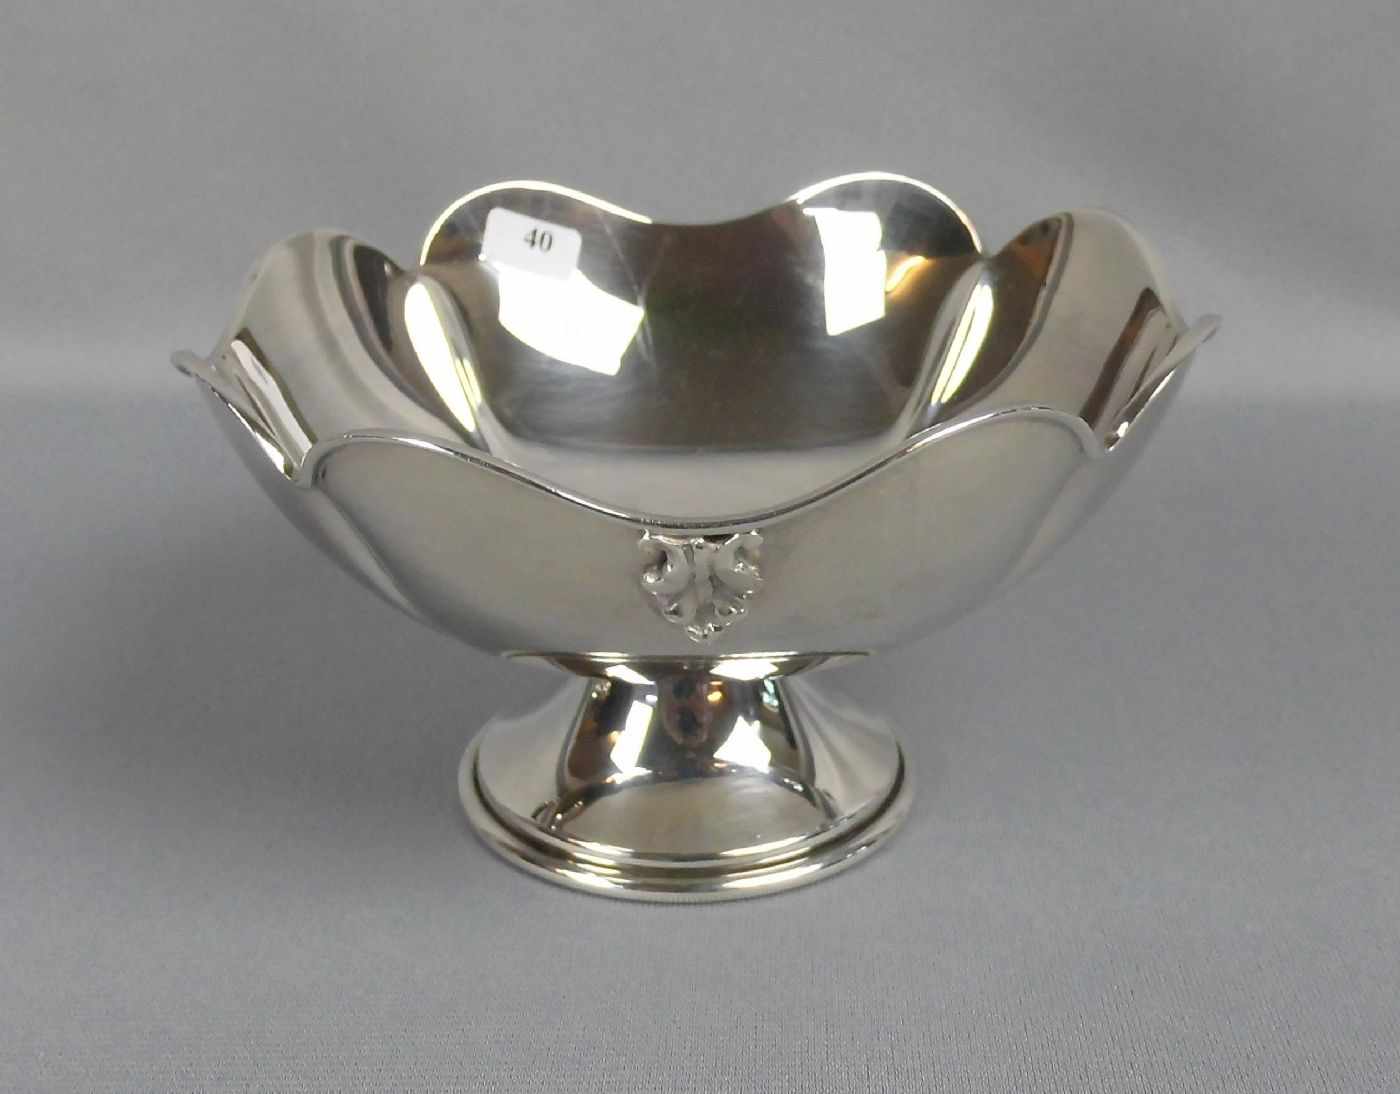 FUSSSCHALE / bowl on a stand, 800er Silber (190 g), Italien, Marke ab 1968, AL (Alessandria).